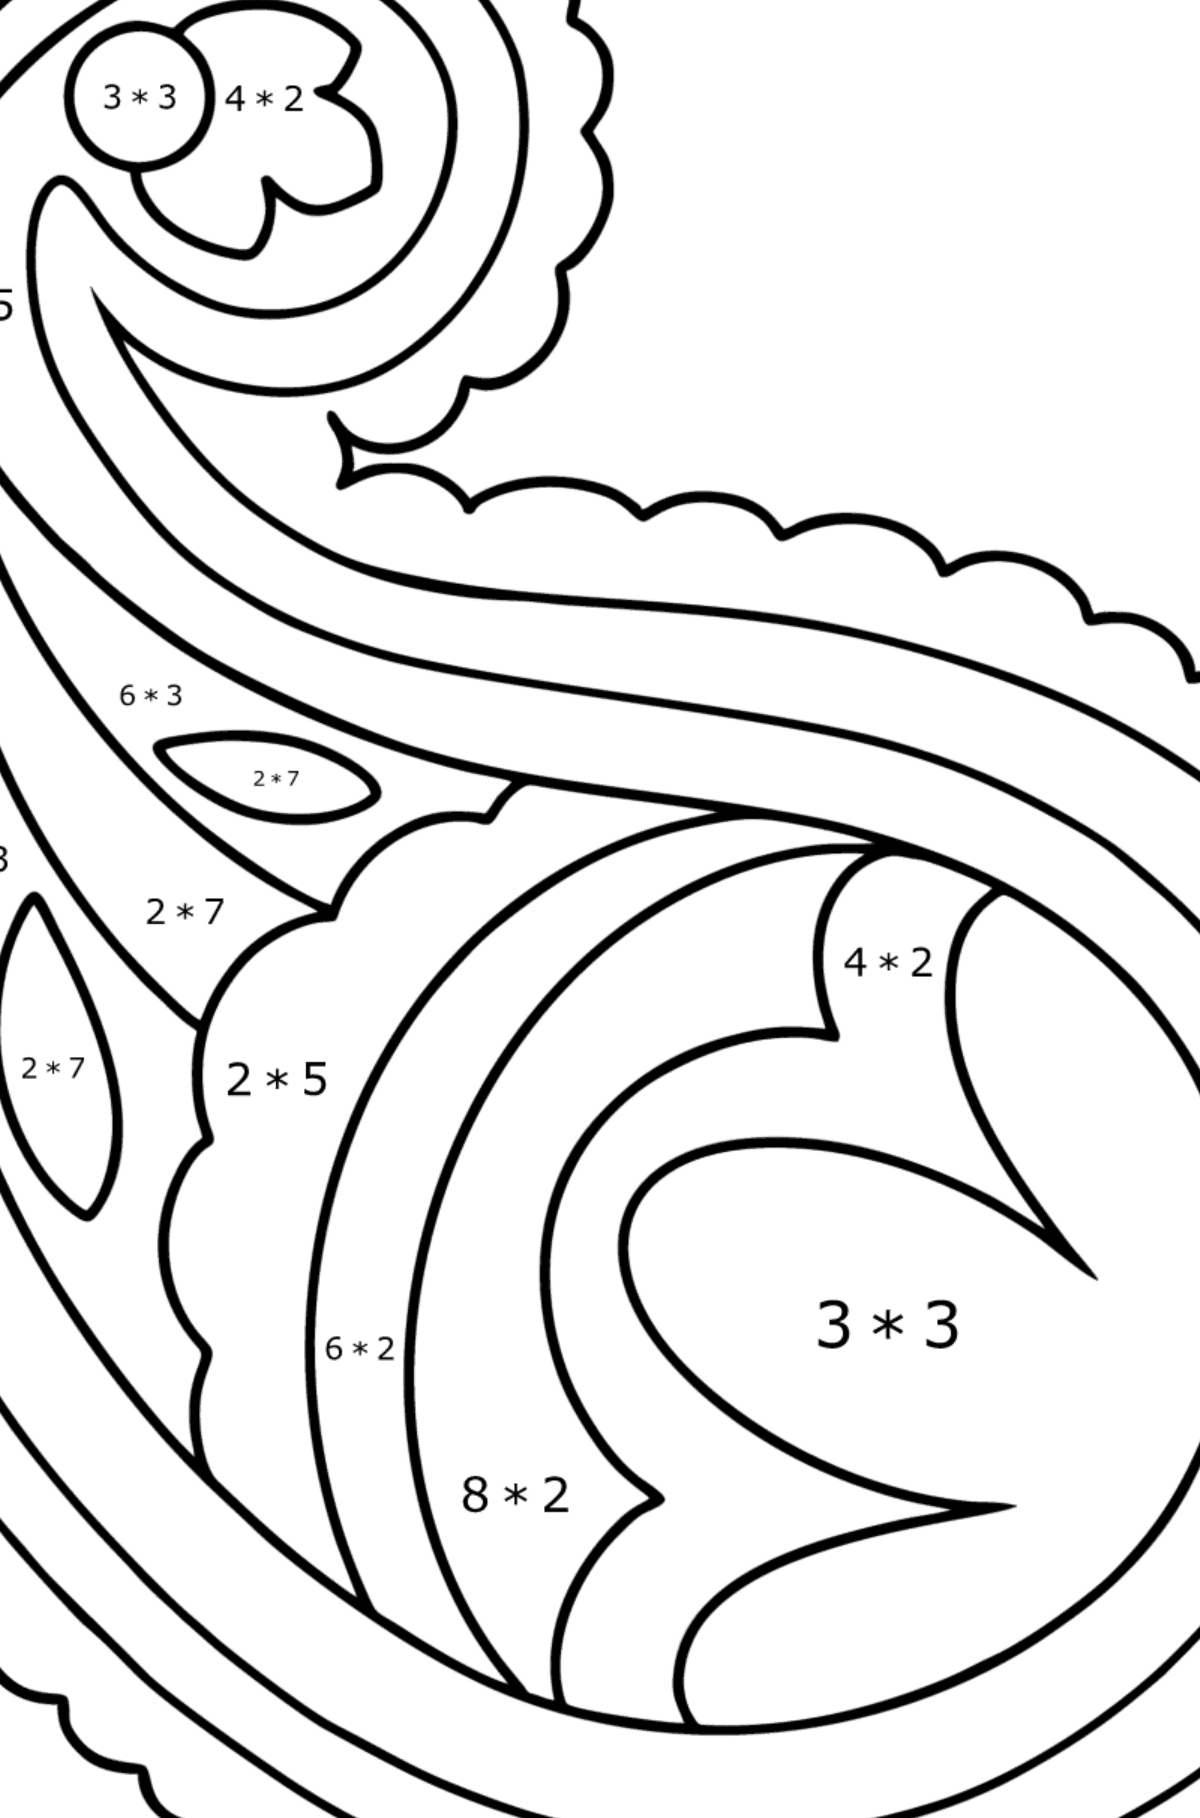 Paisley coloring page - 16 Elements - Math Coloring - Multiplication for Kids